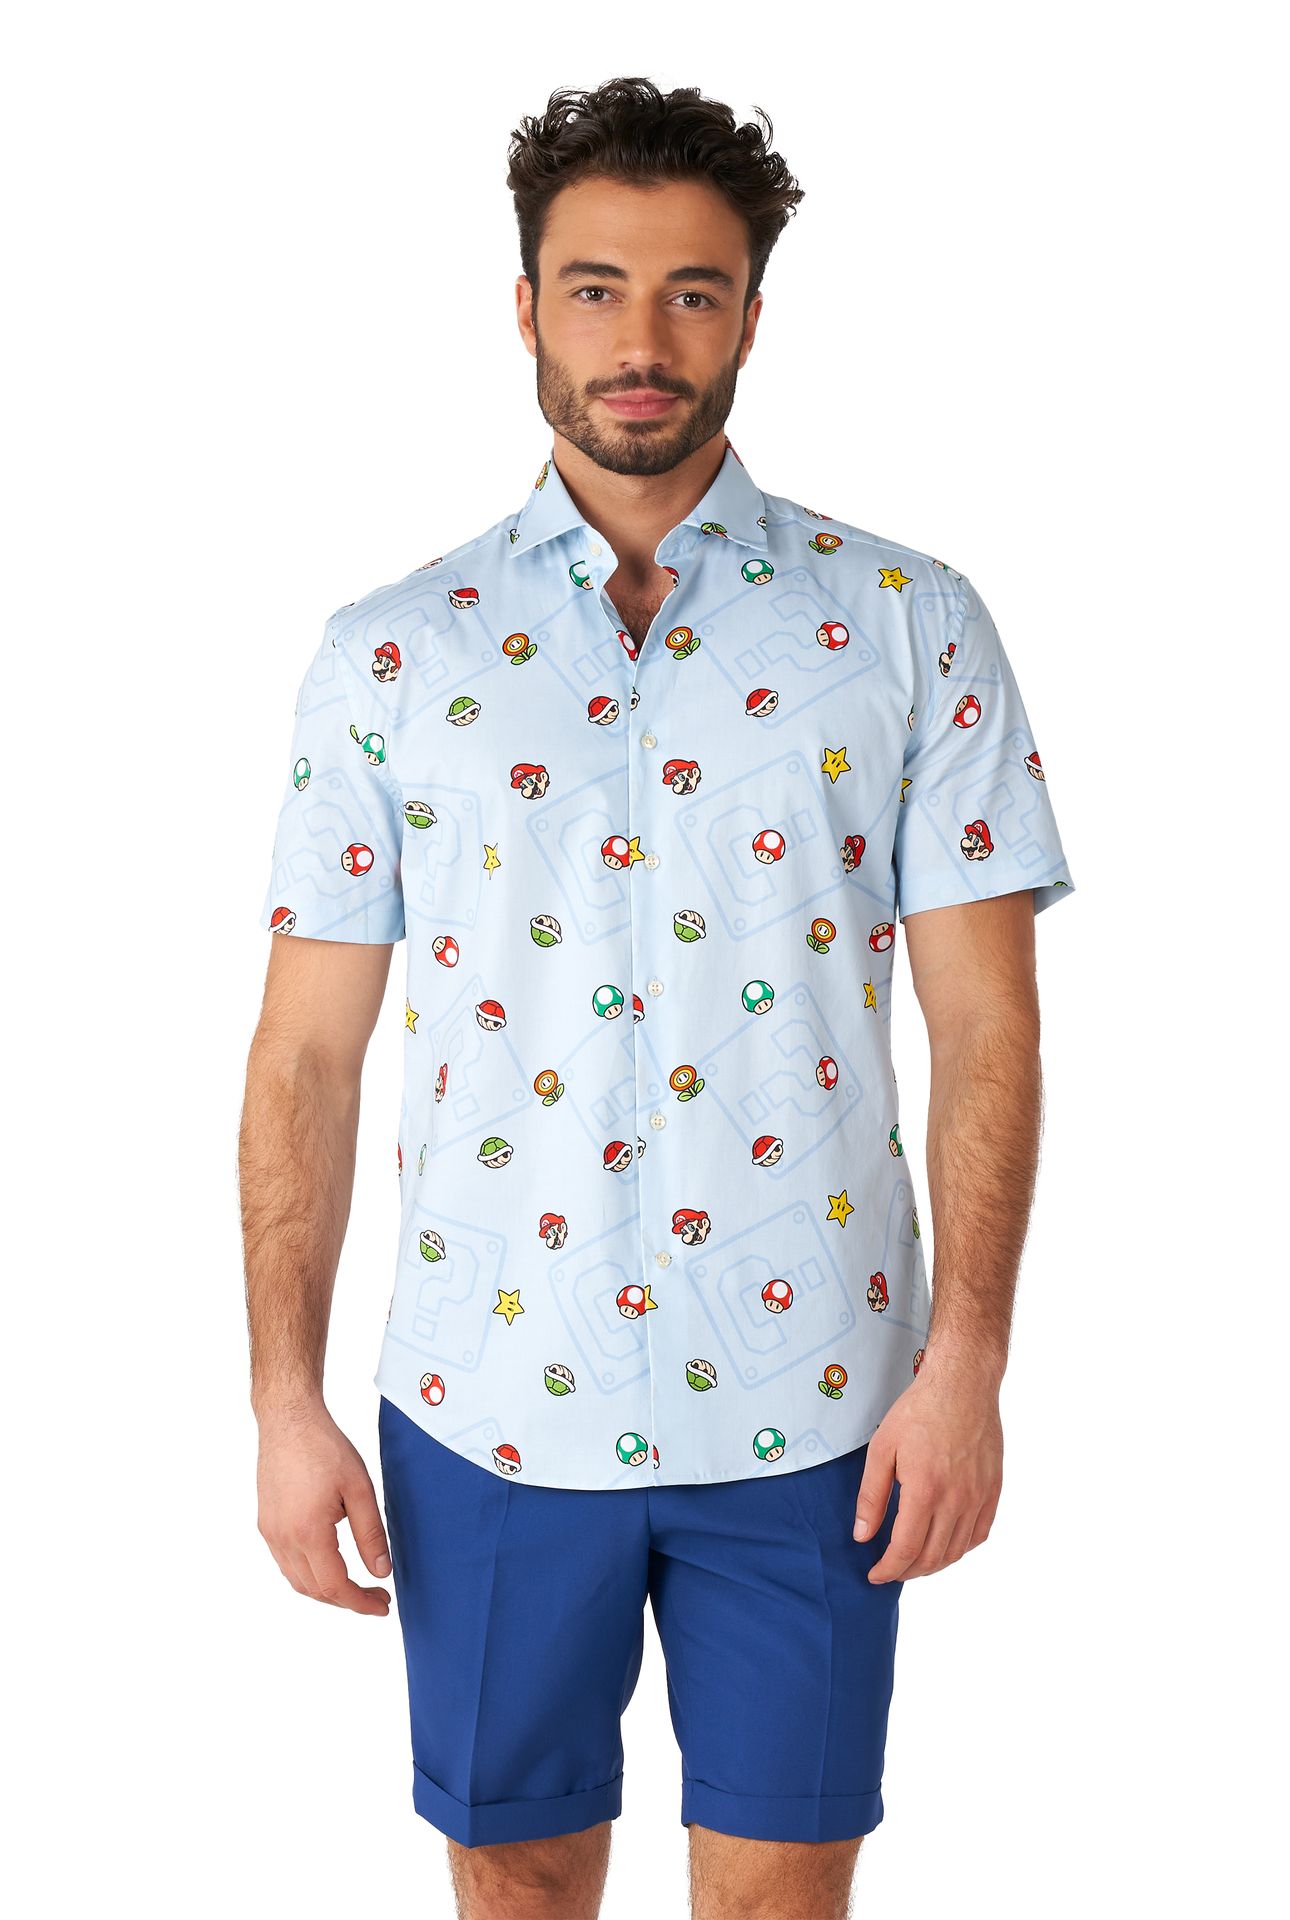 Opposuits Super Mario Icons blouse